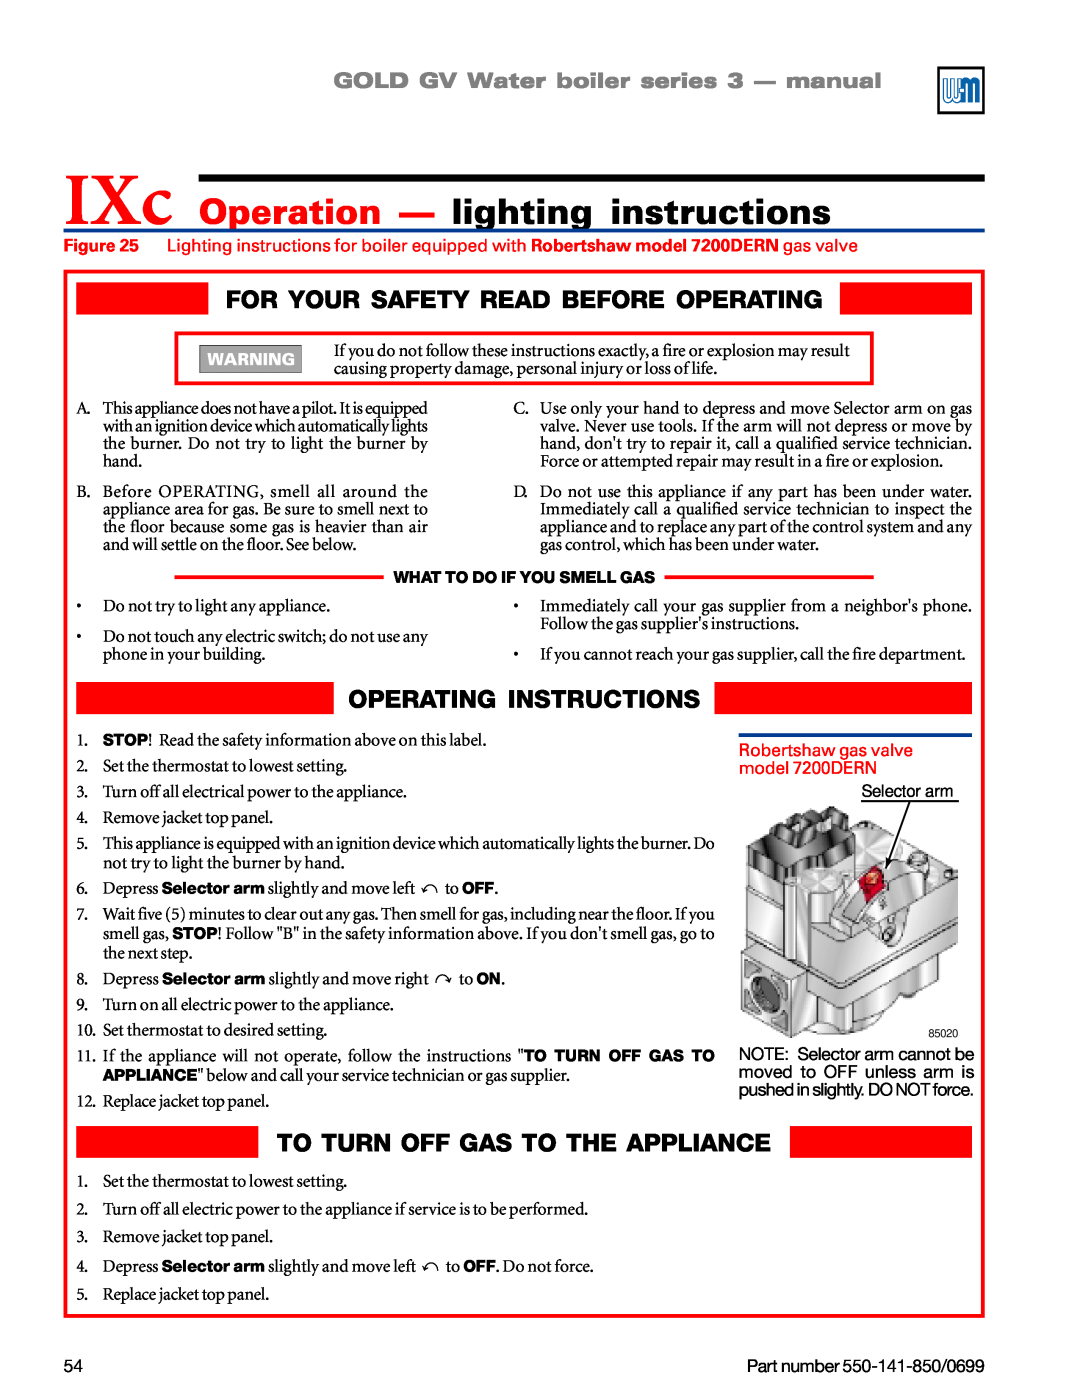 Weil-McLain GOLD DV WATER BOILER manual IXc Operation — lighting instructions, For Your Safety Read Before Operating 